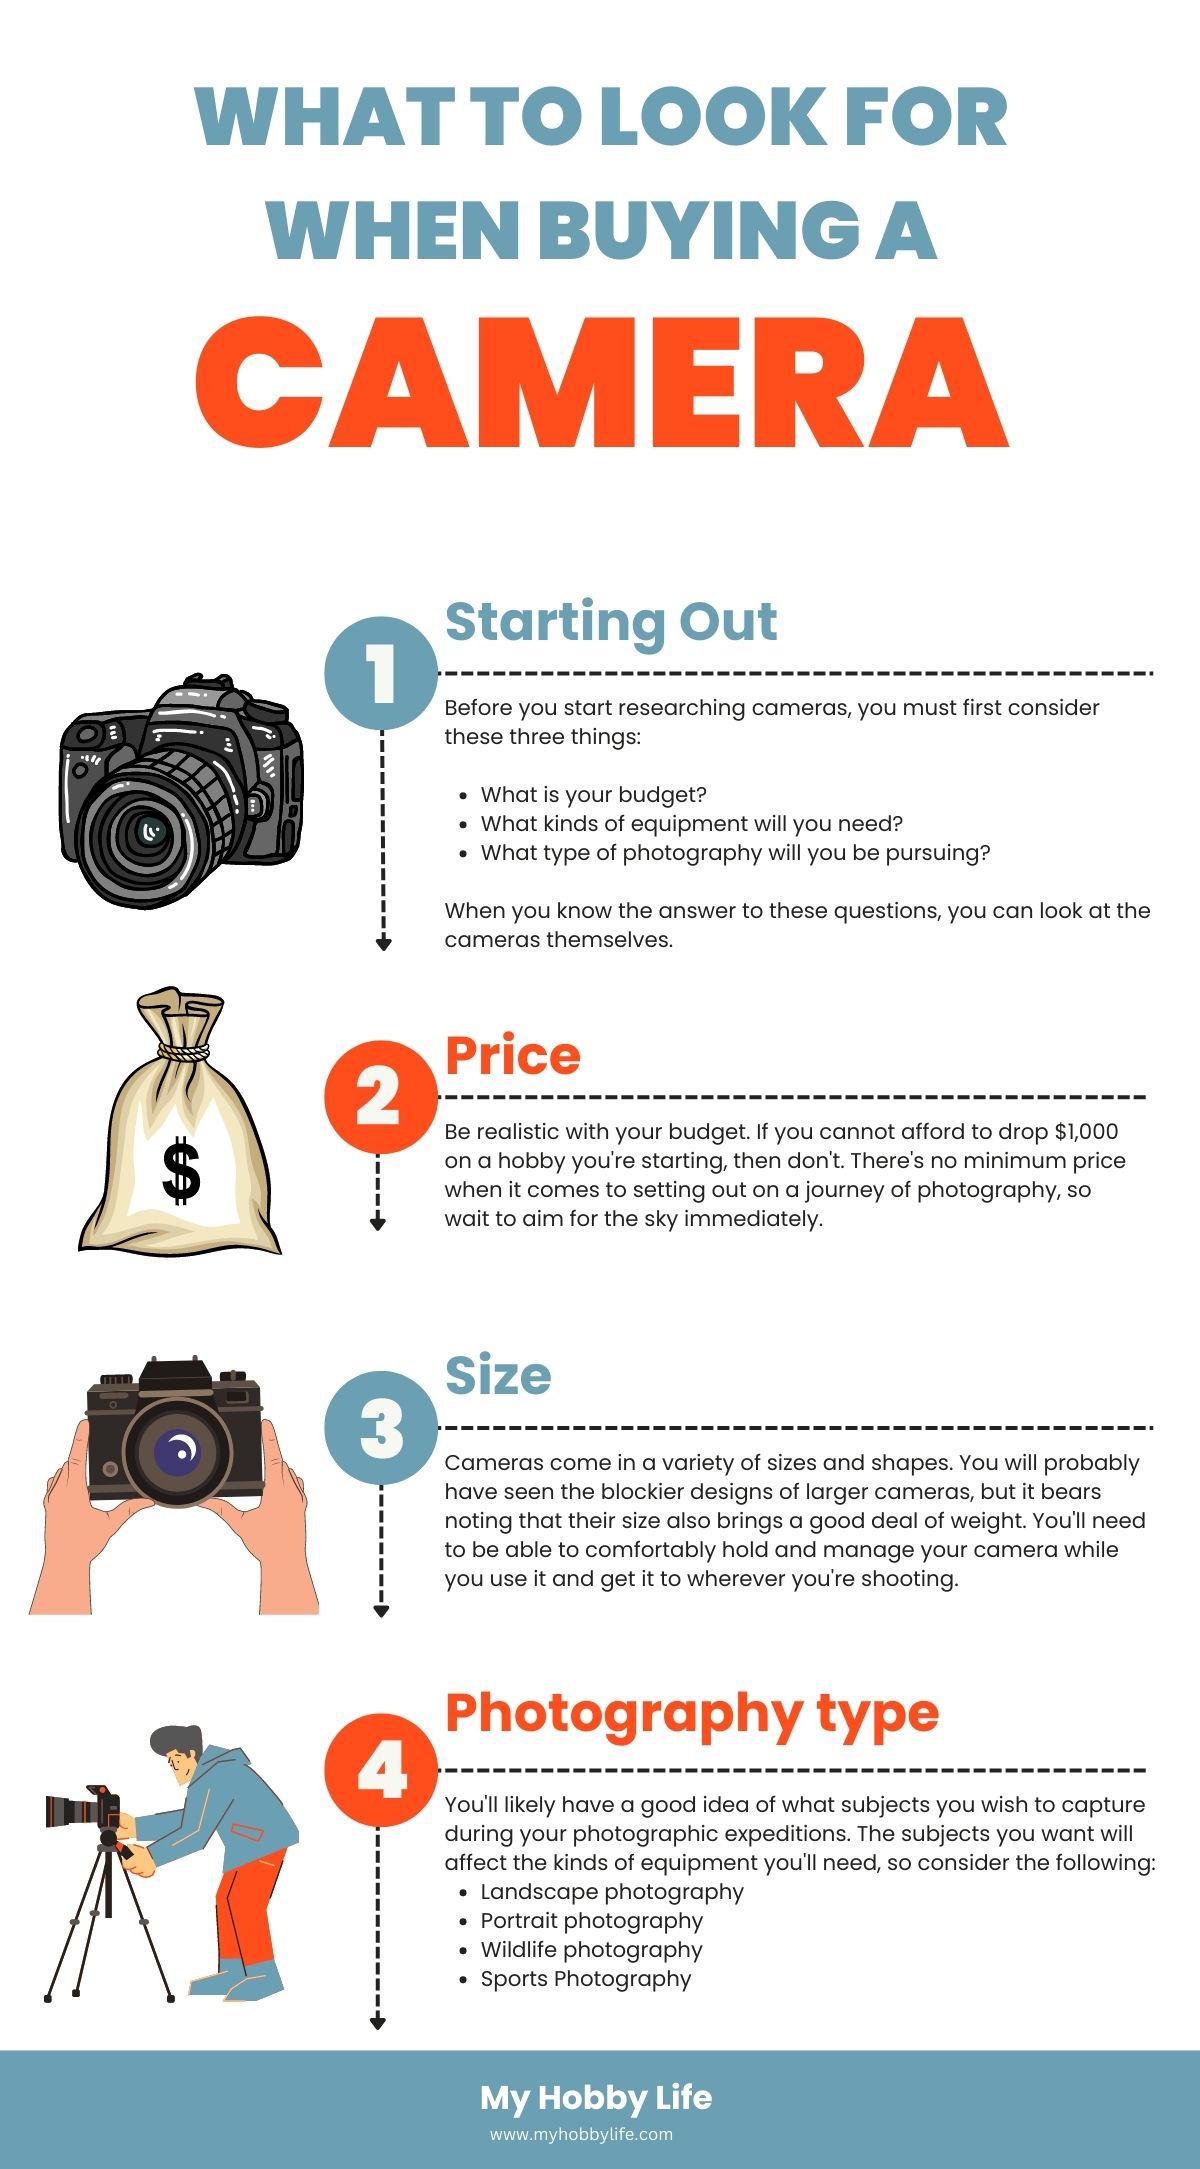 What to look for when buying a camera